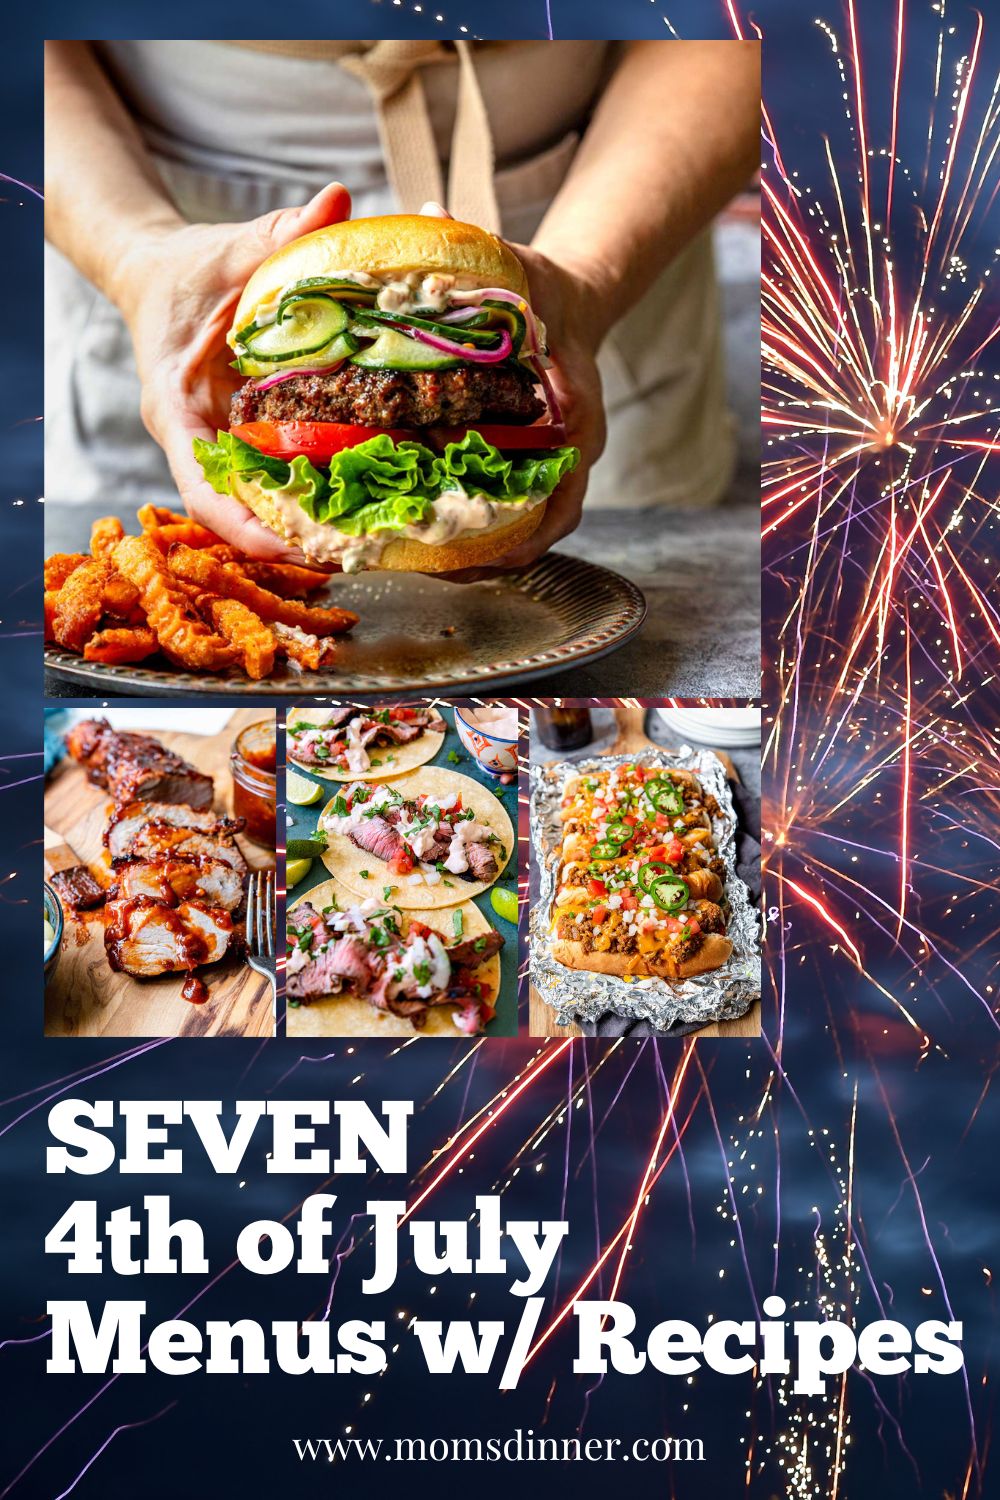 seven fourth of july menus text overlay with food photos and fireworks picture